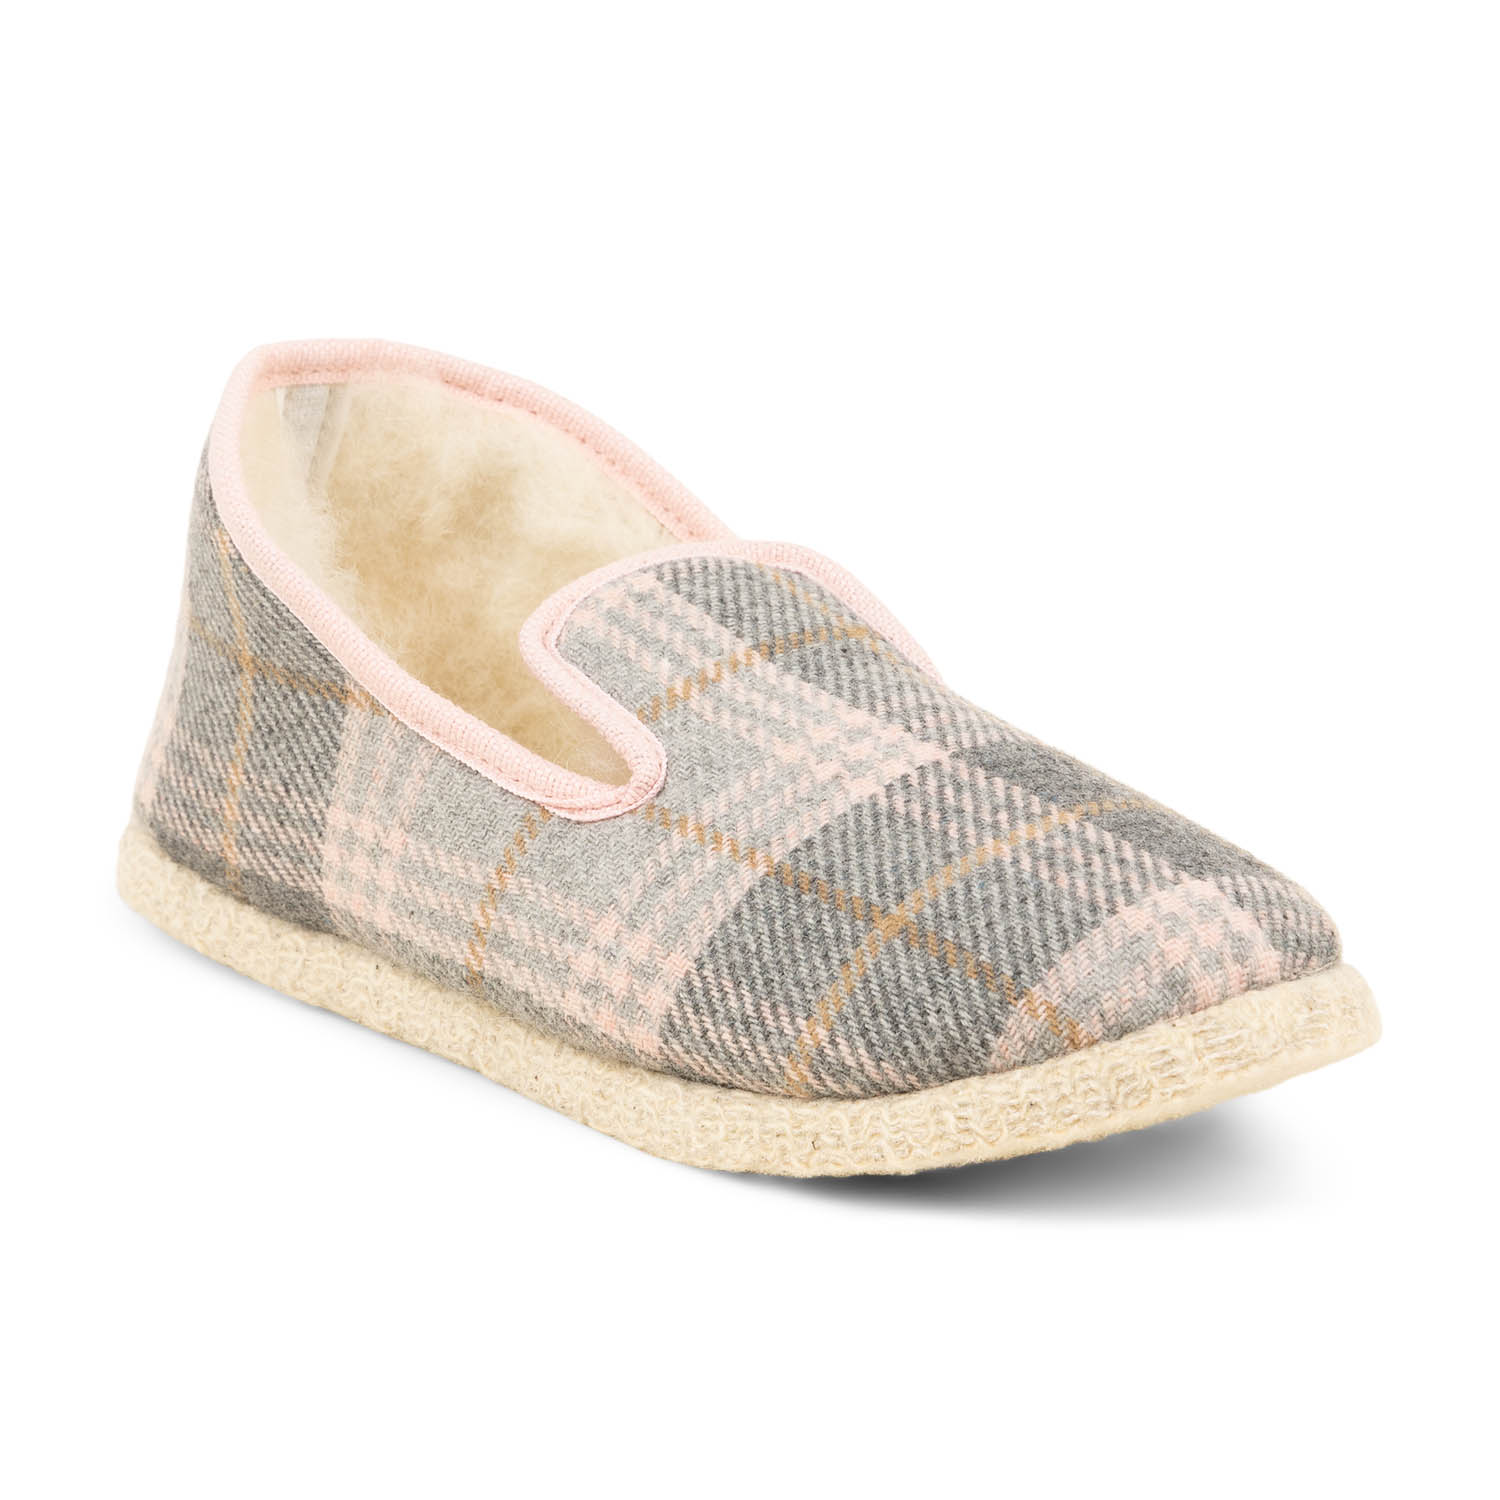 02 - MARTINE -  - Chaussons - Textile